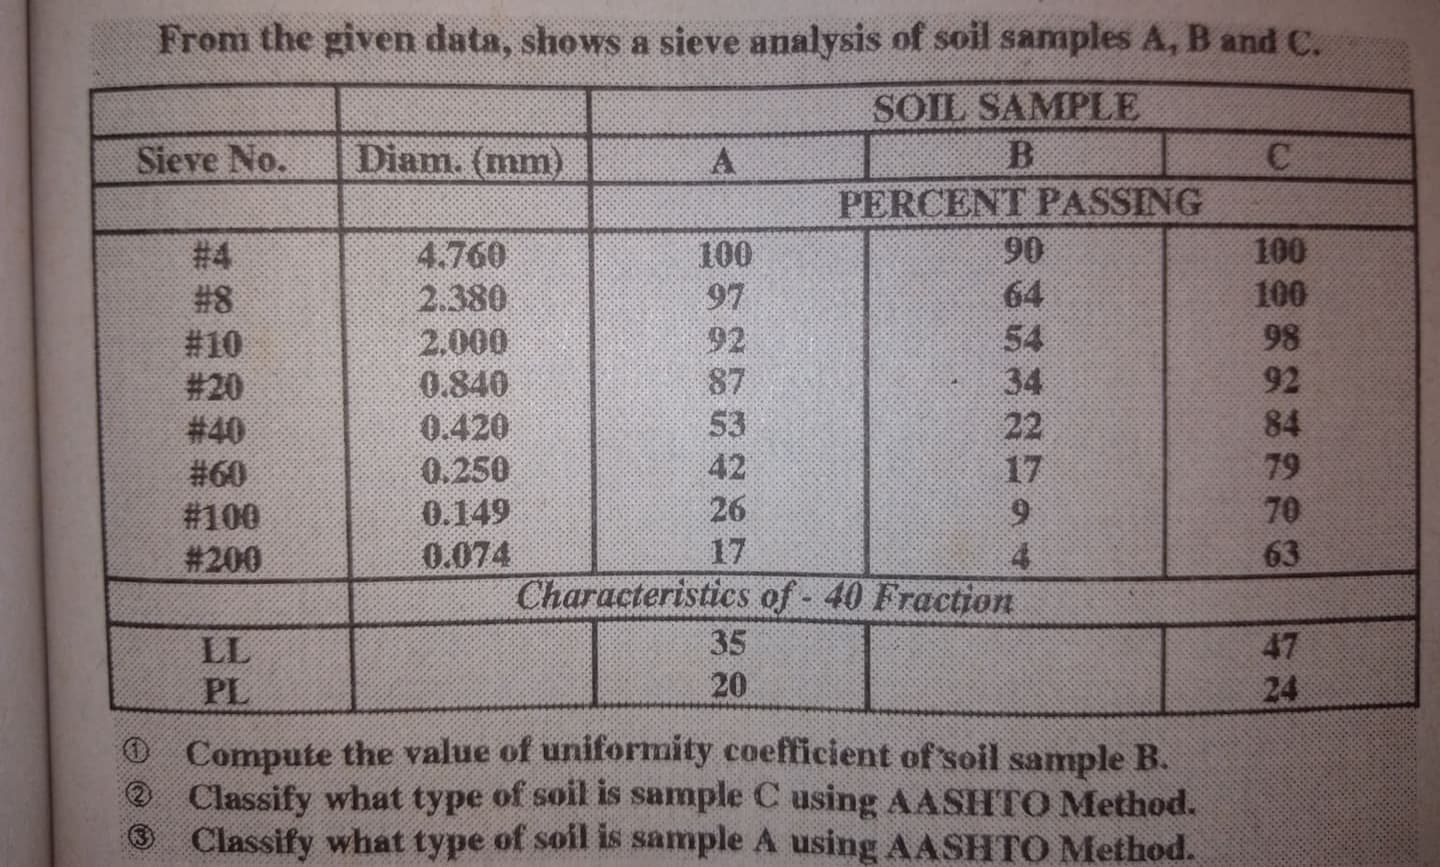 From the given data, shows a sieve analysis of soil samples A, B and C.
SOIL SAMPLE
B
Sieve No.
Diam. (mm)
A
PERCENT PASSING
90
64
54
34
22
17
9.
4
100
100
#4
#8
#10
# 20
# 40
# 60
#100
# 200
4.760
2.380
2.000
0.840
0.420
0.250
0.149
0.074
Characteristics of 40 Fraction
100
97
92
87
53
42
26
98
92
84
79
70
63
17
35
20
47
LL
PL
24
OCompute the value of uniformity coefficient of soil sample B.
O Classify what type of soil is sample C using AASHTO Method.
O Classify what type of soil is sample A using AASHTO Method.
